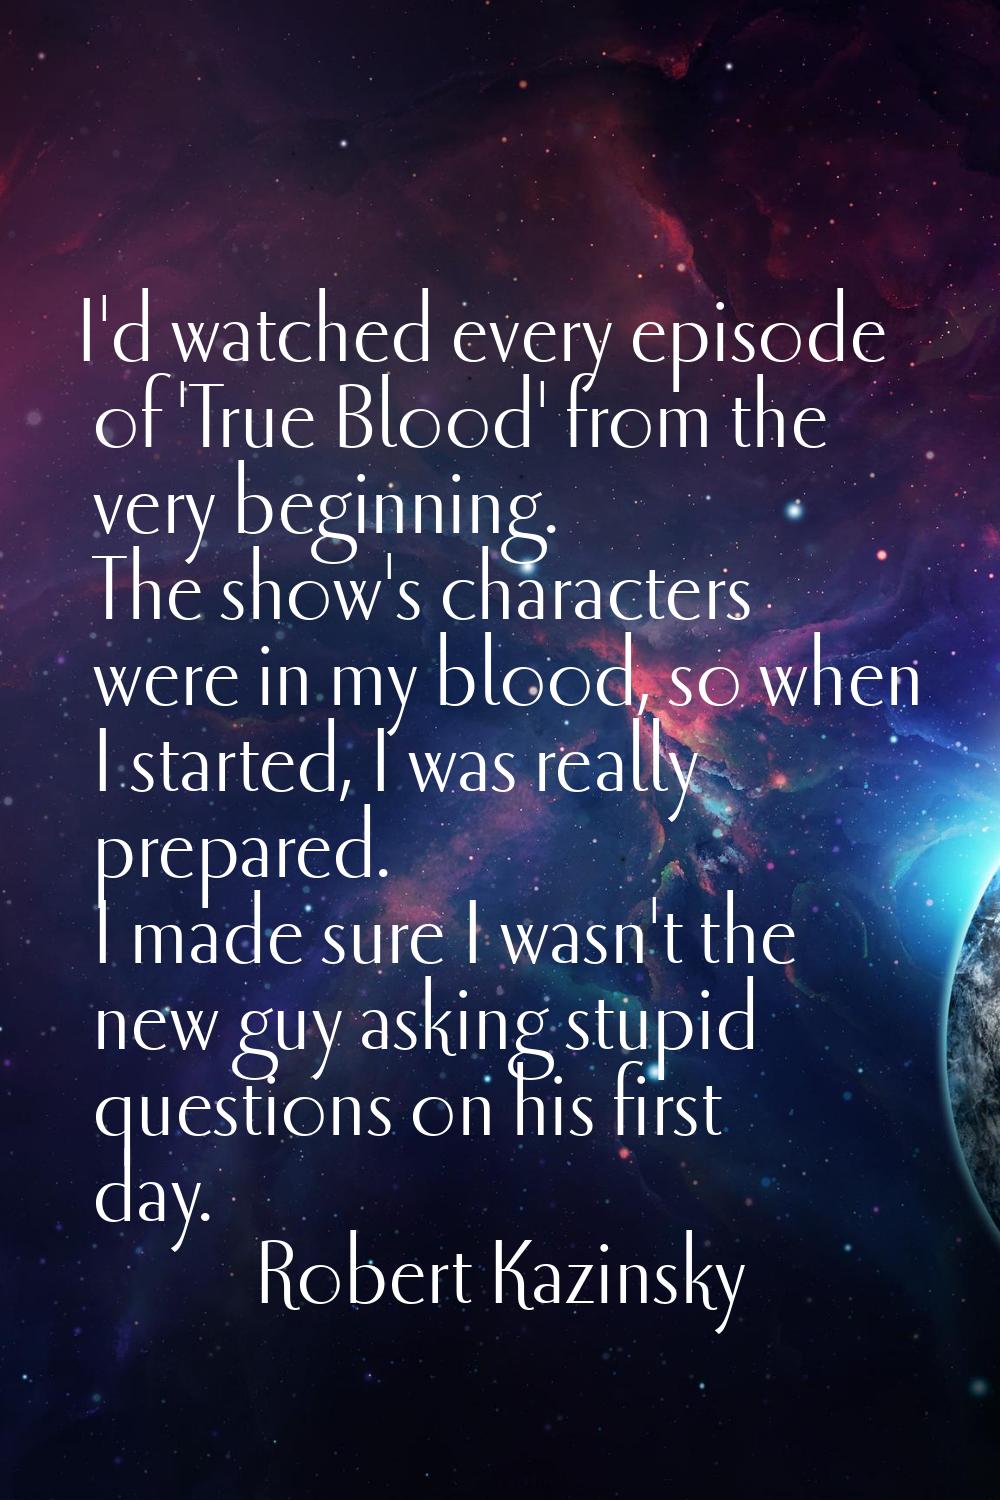 I'd watched every episode of 'True Blood' from the very beginning. The show's characters were in my